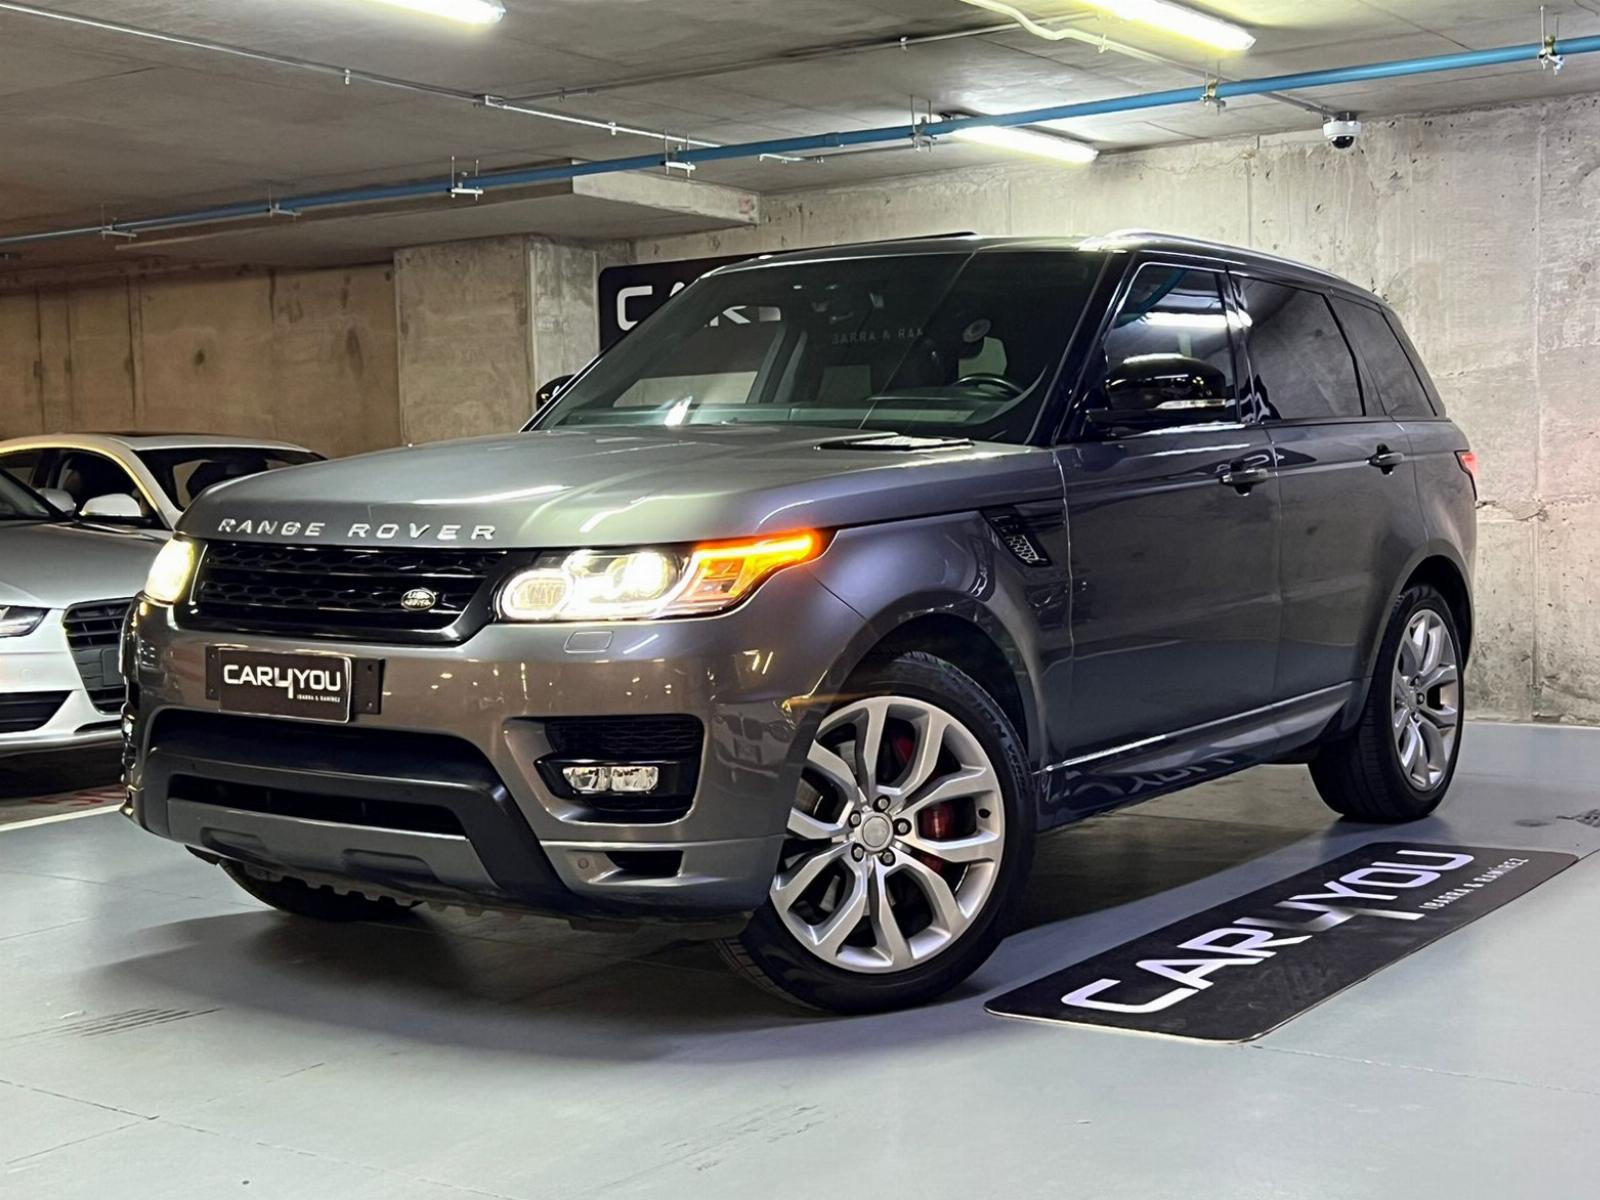 LAND ROVER RANGE ROVER SPORT 5.0 2016 SUPERCHARGED AUTOBIOGRAPHY - FULL MOTOR